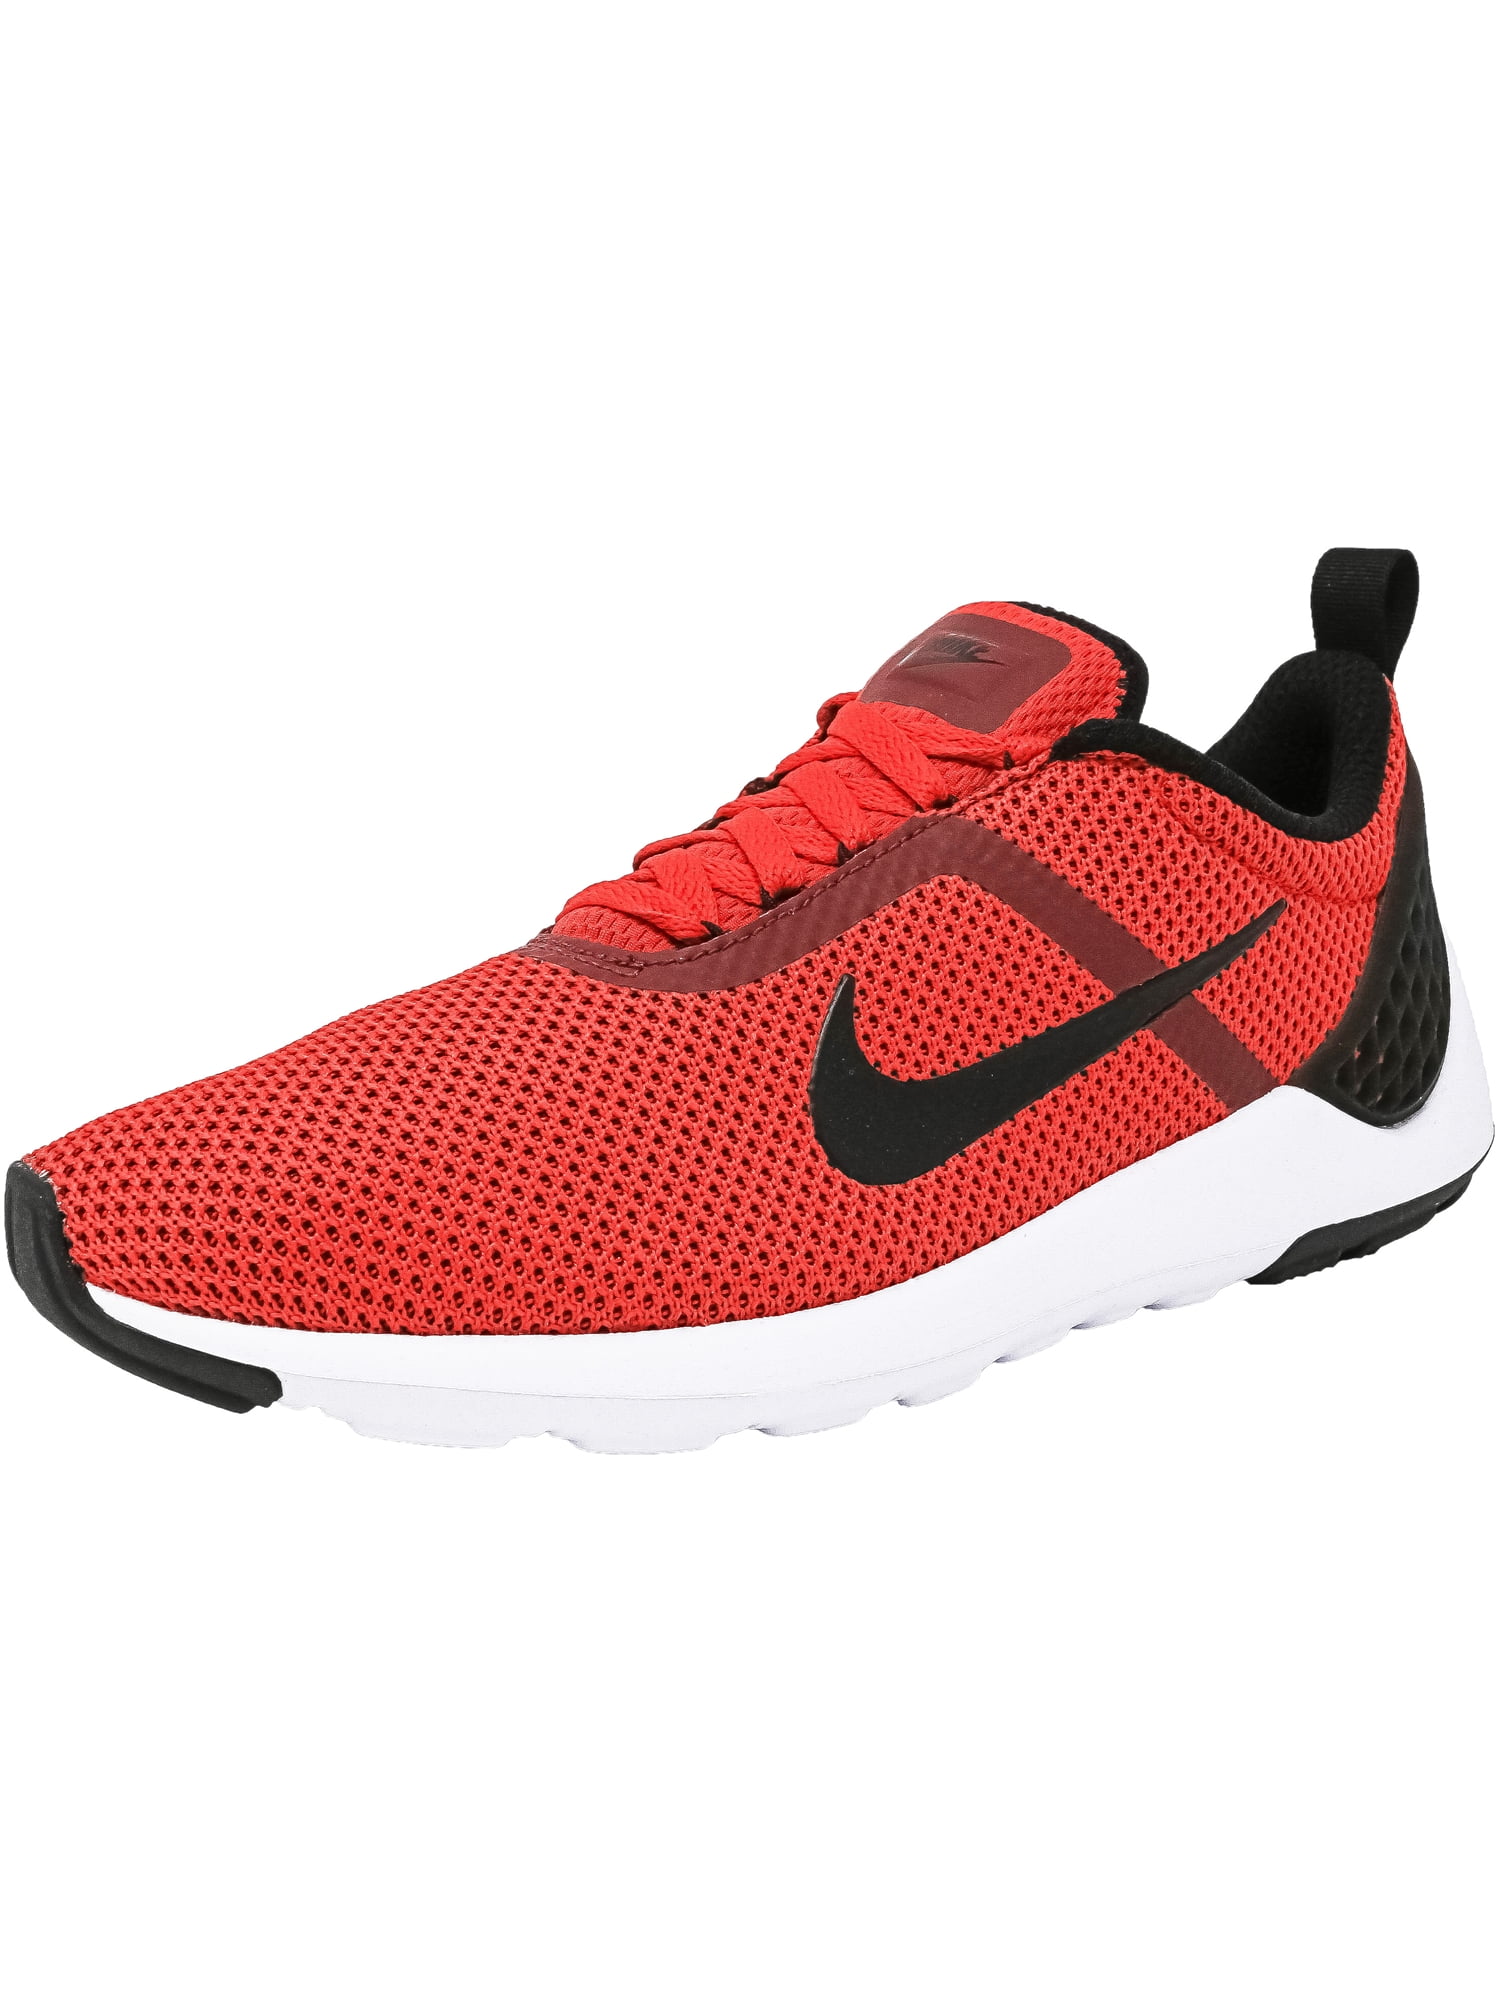 nike mens red and black shoes